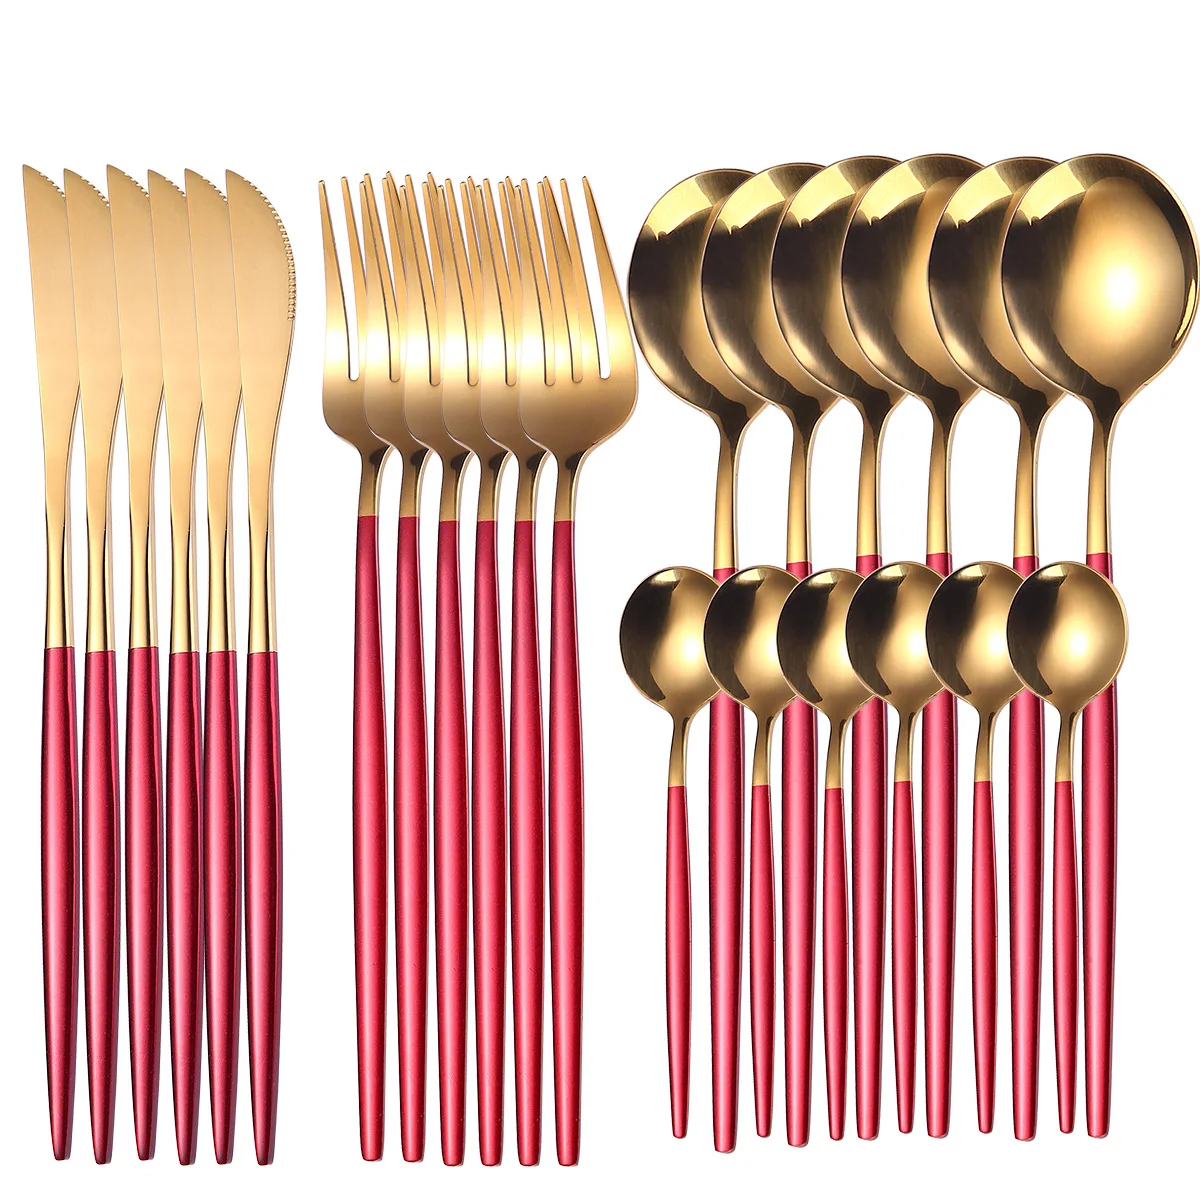 

LT148 Hot Selling 24 pcs Gold Flatware Set Stainless Steel Cutlery Set Western Food Spoon Knife Fork Set, See pictures